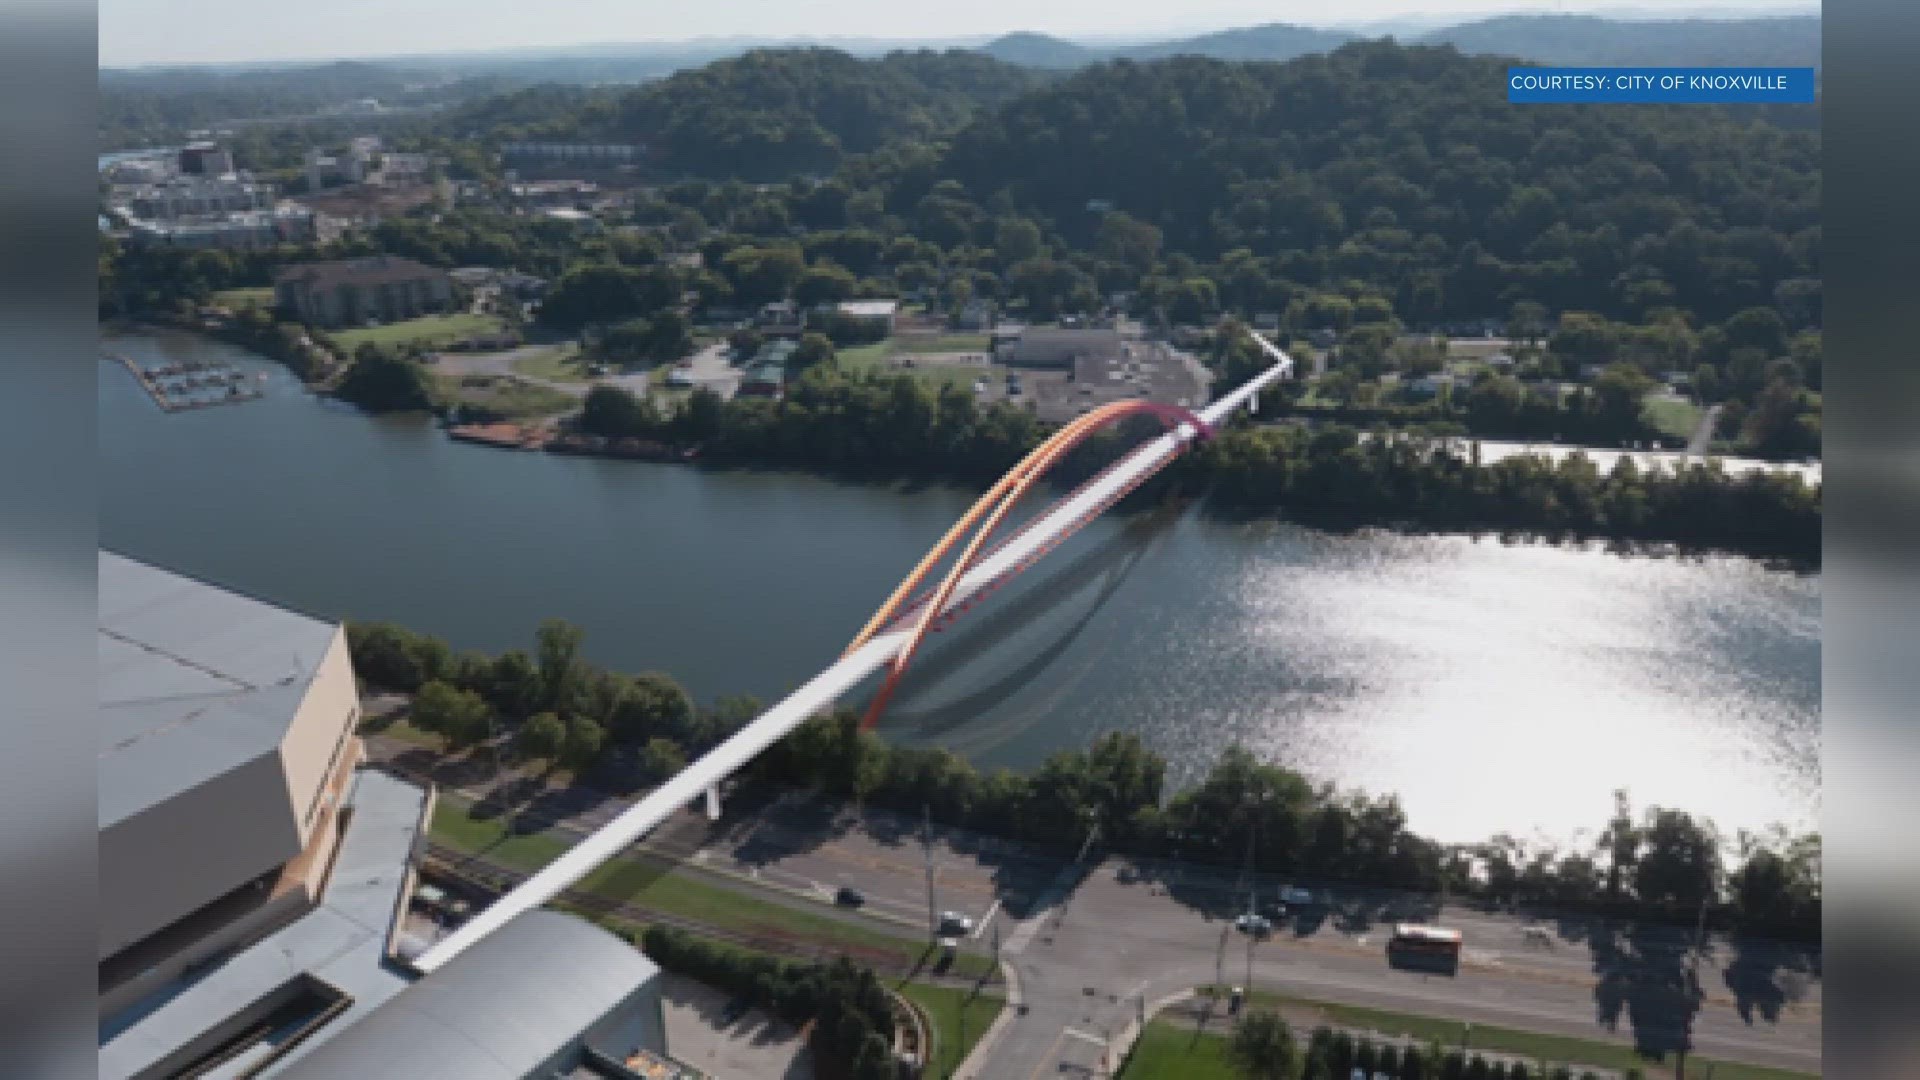 The bridge will be built over the Tennessee River connecting the South Knoxville Waterfront with the University of Tennessee campus and downtown.